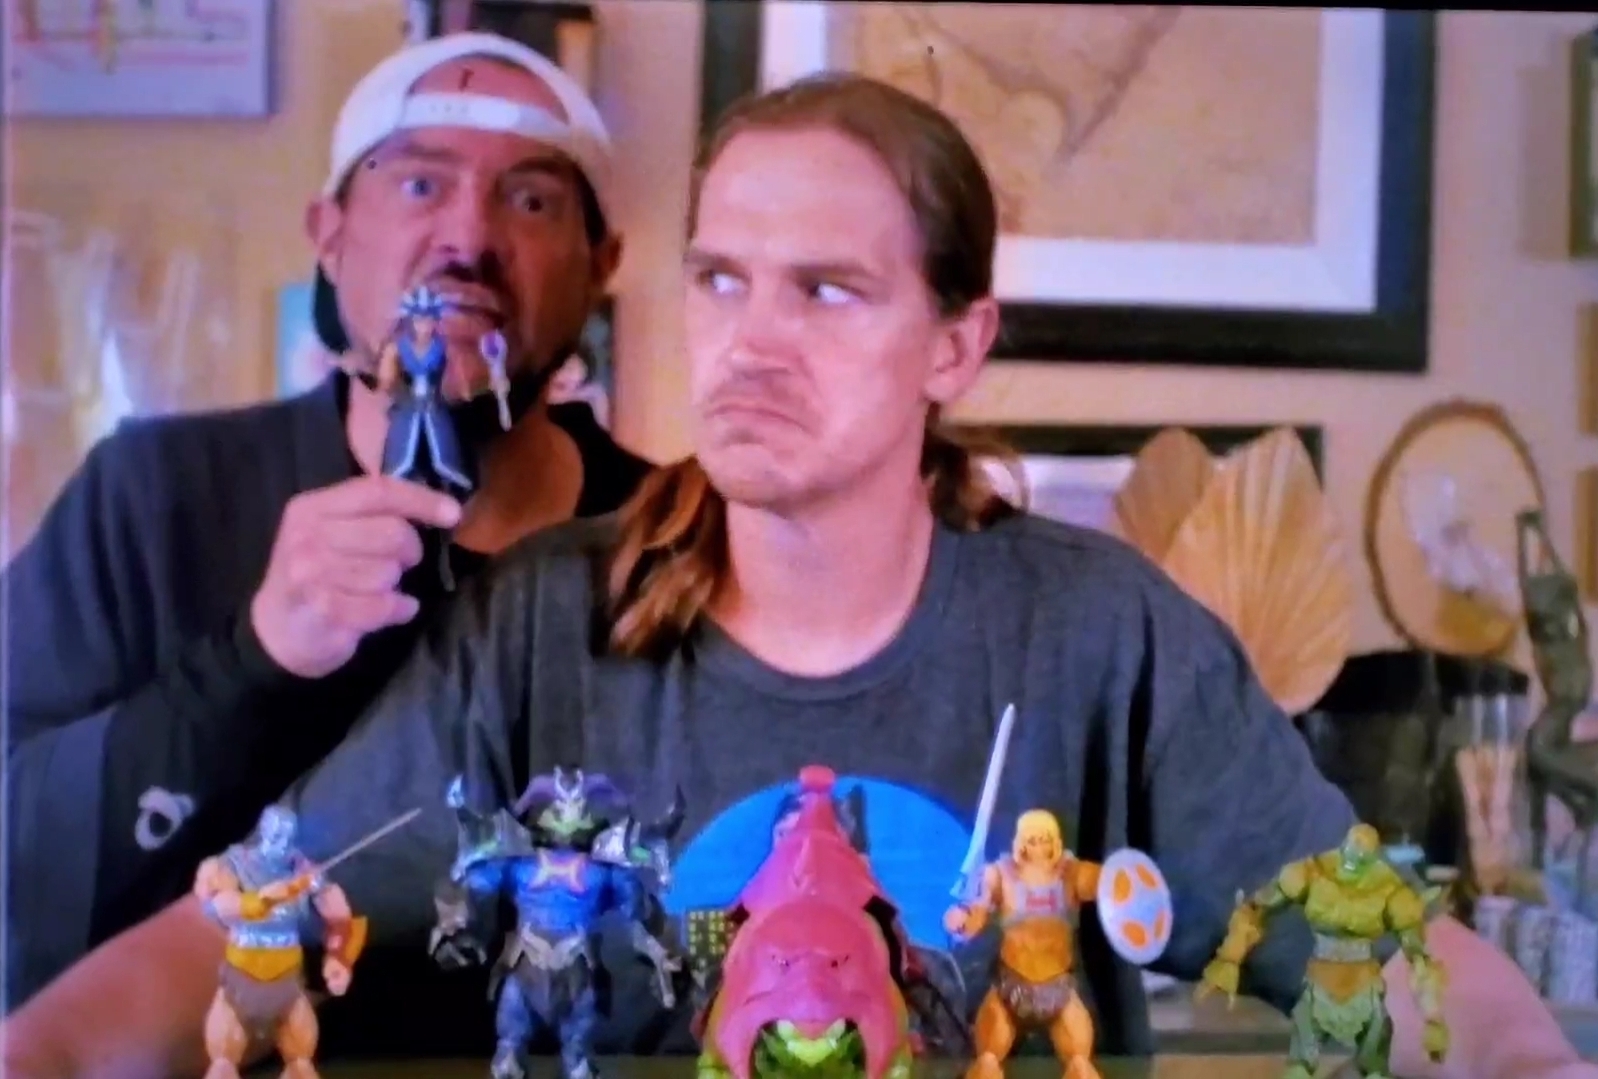 Watch this hilarious Masters of the Universe: Revelation TV Commercial featuring Kevin Smith & Jason Mewes